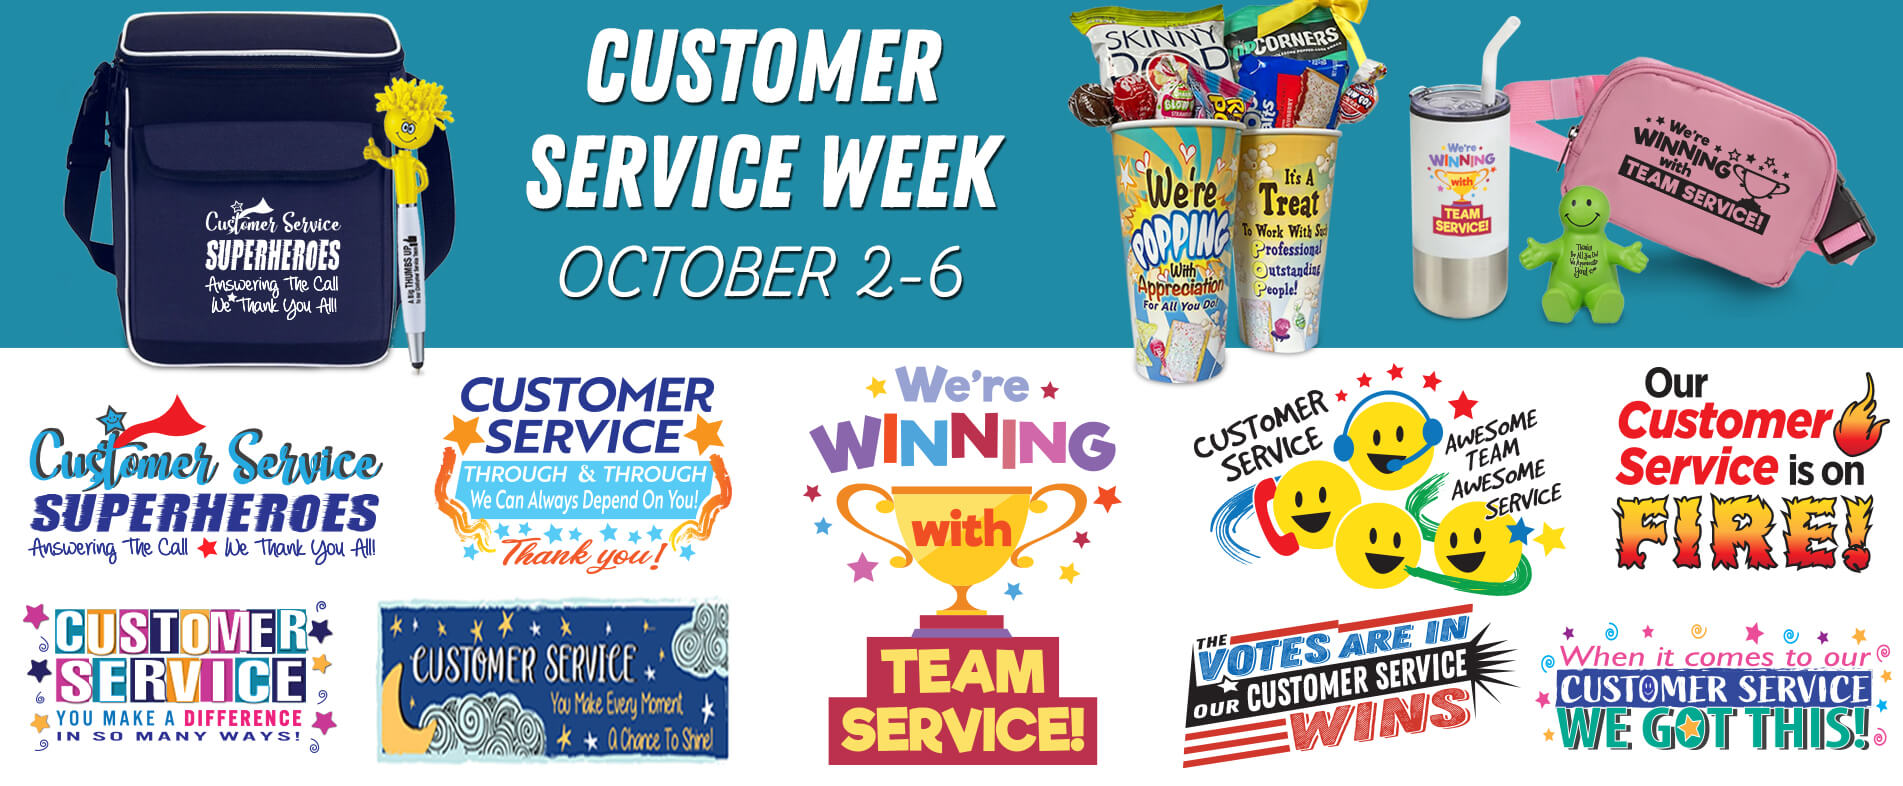 Customer Service Week Appreciation Themes 2023 | Care Promotions